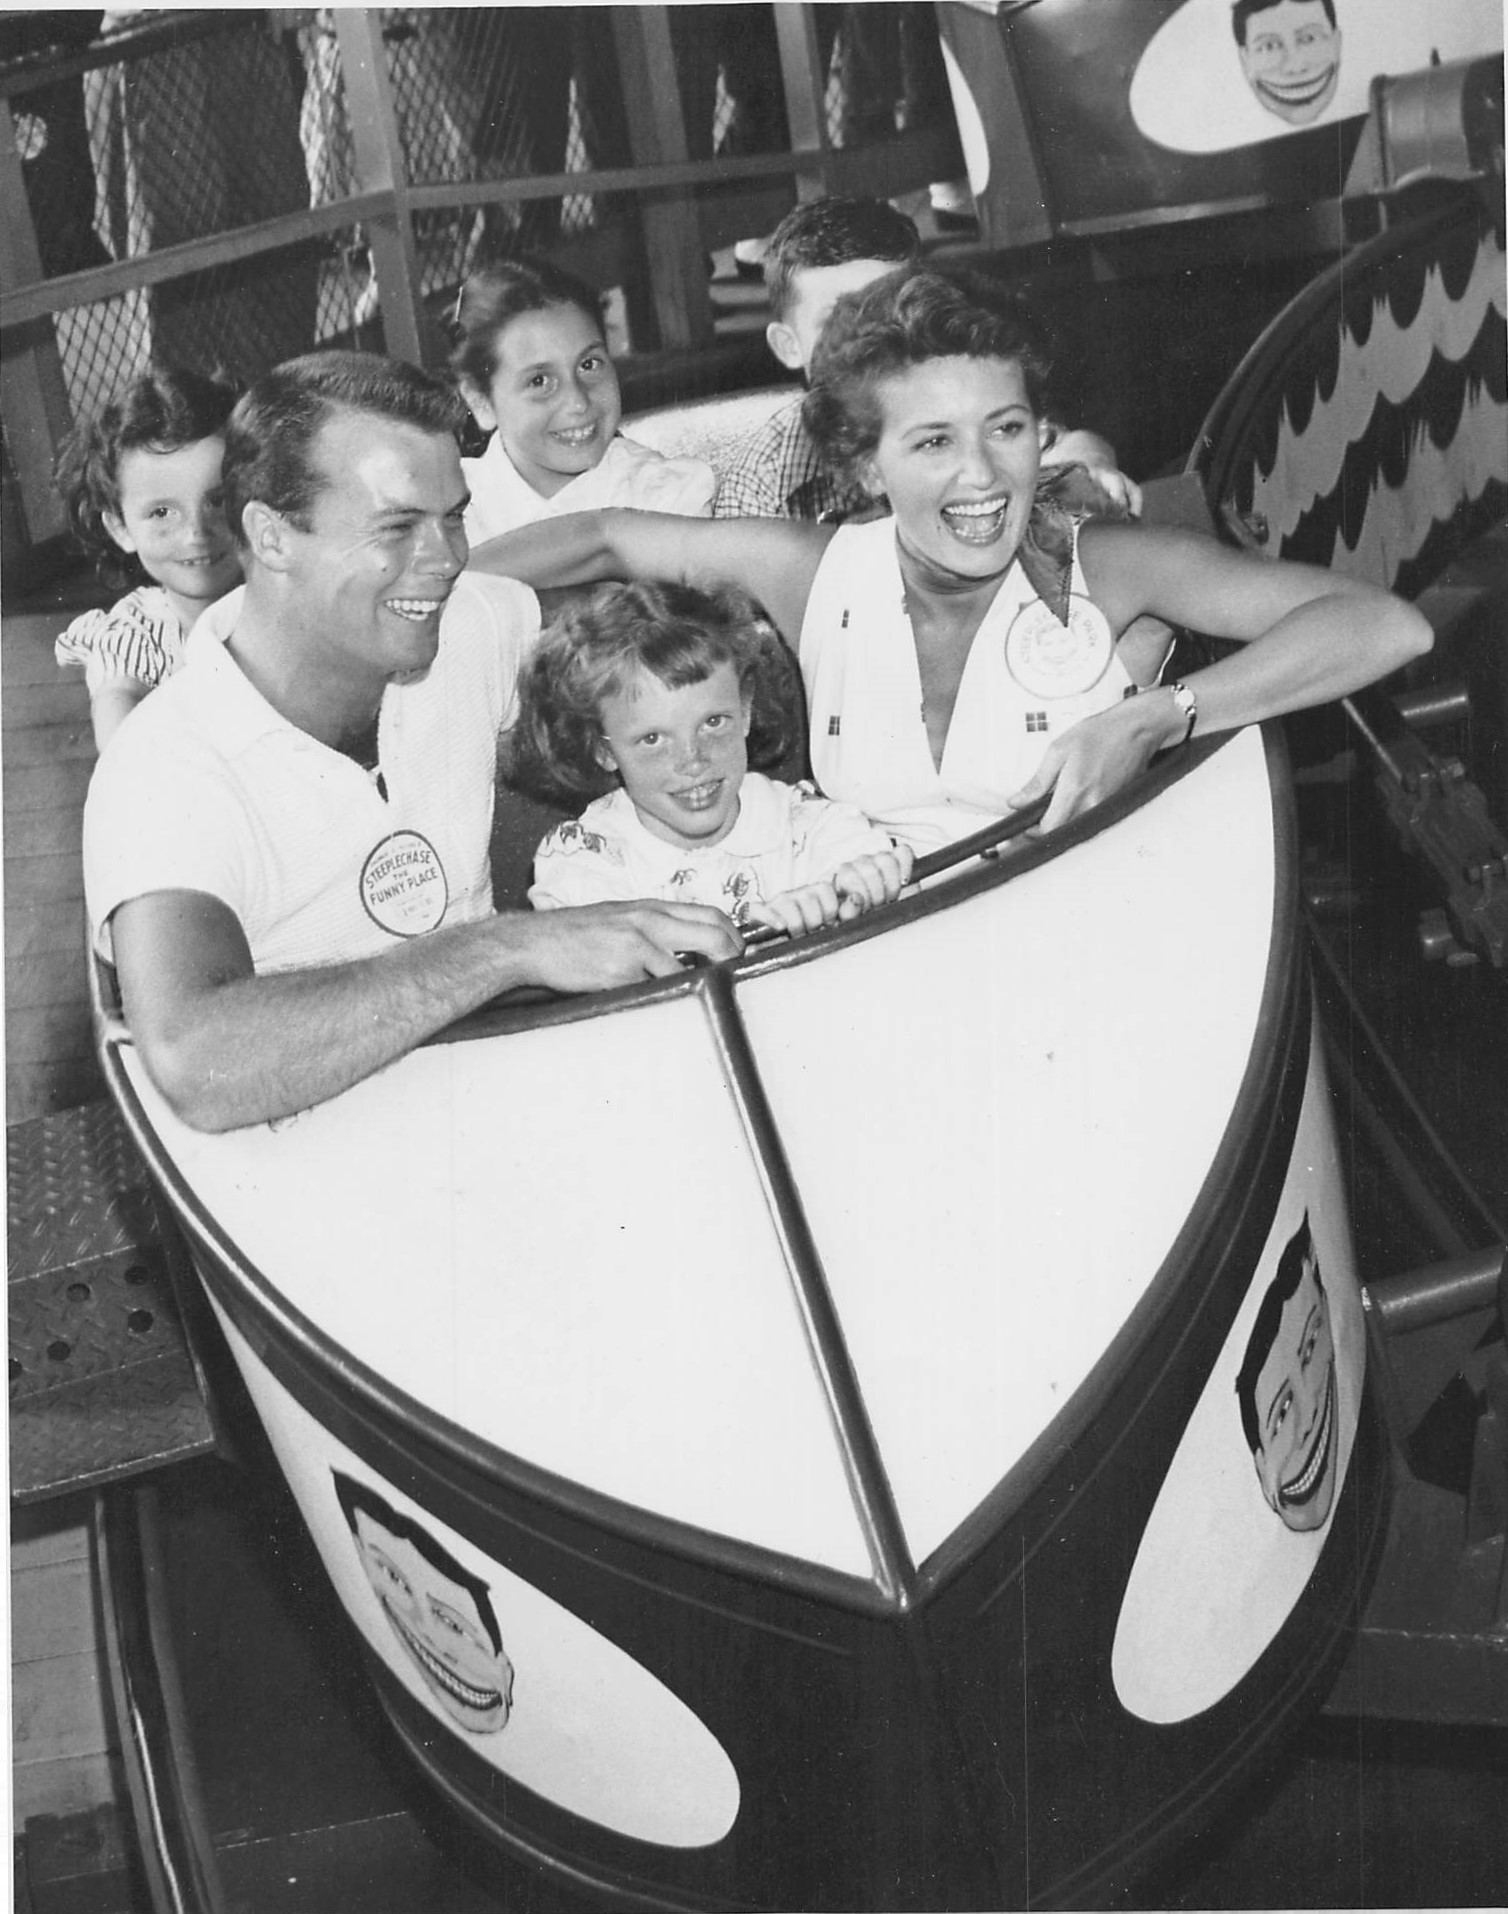  Early July 1954, Atlantic City, N.J.  “They (Bobby and May) had a very fun relationship. Not sister-brother, but they laughed a lot and enjoyed whatever it was that they were doing. I think they helped each other, too, by reading lines off camera to